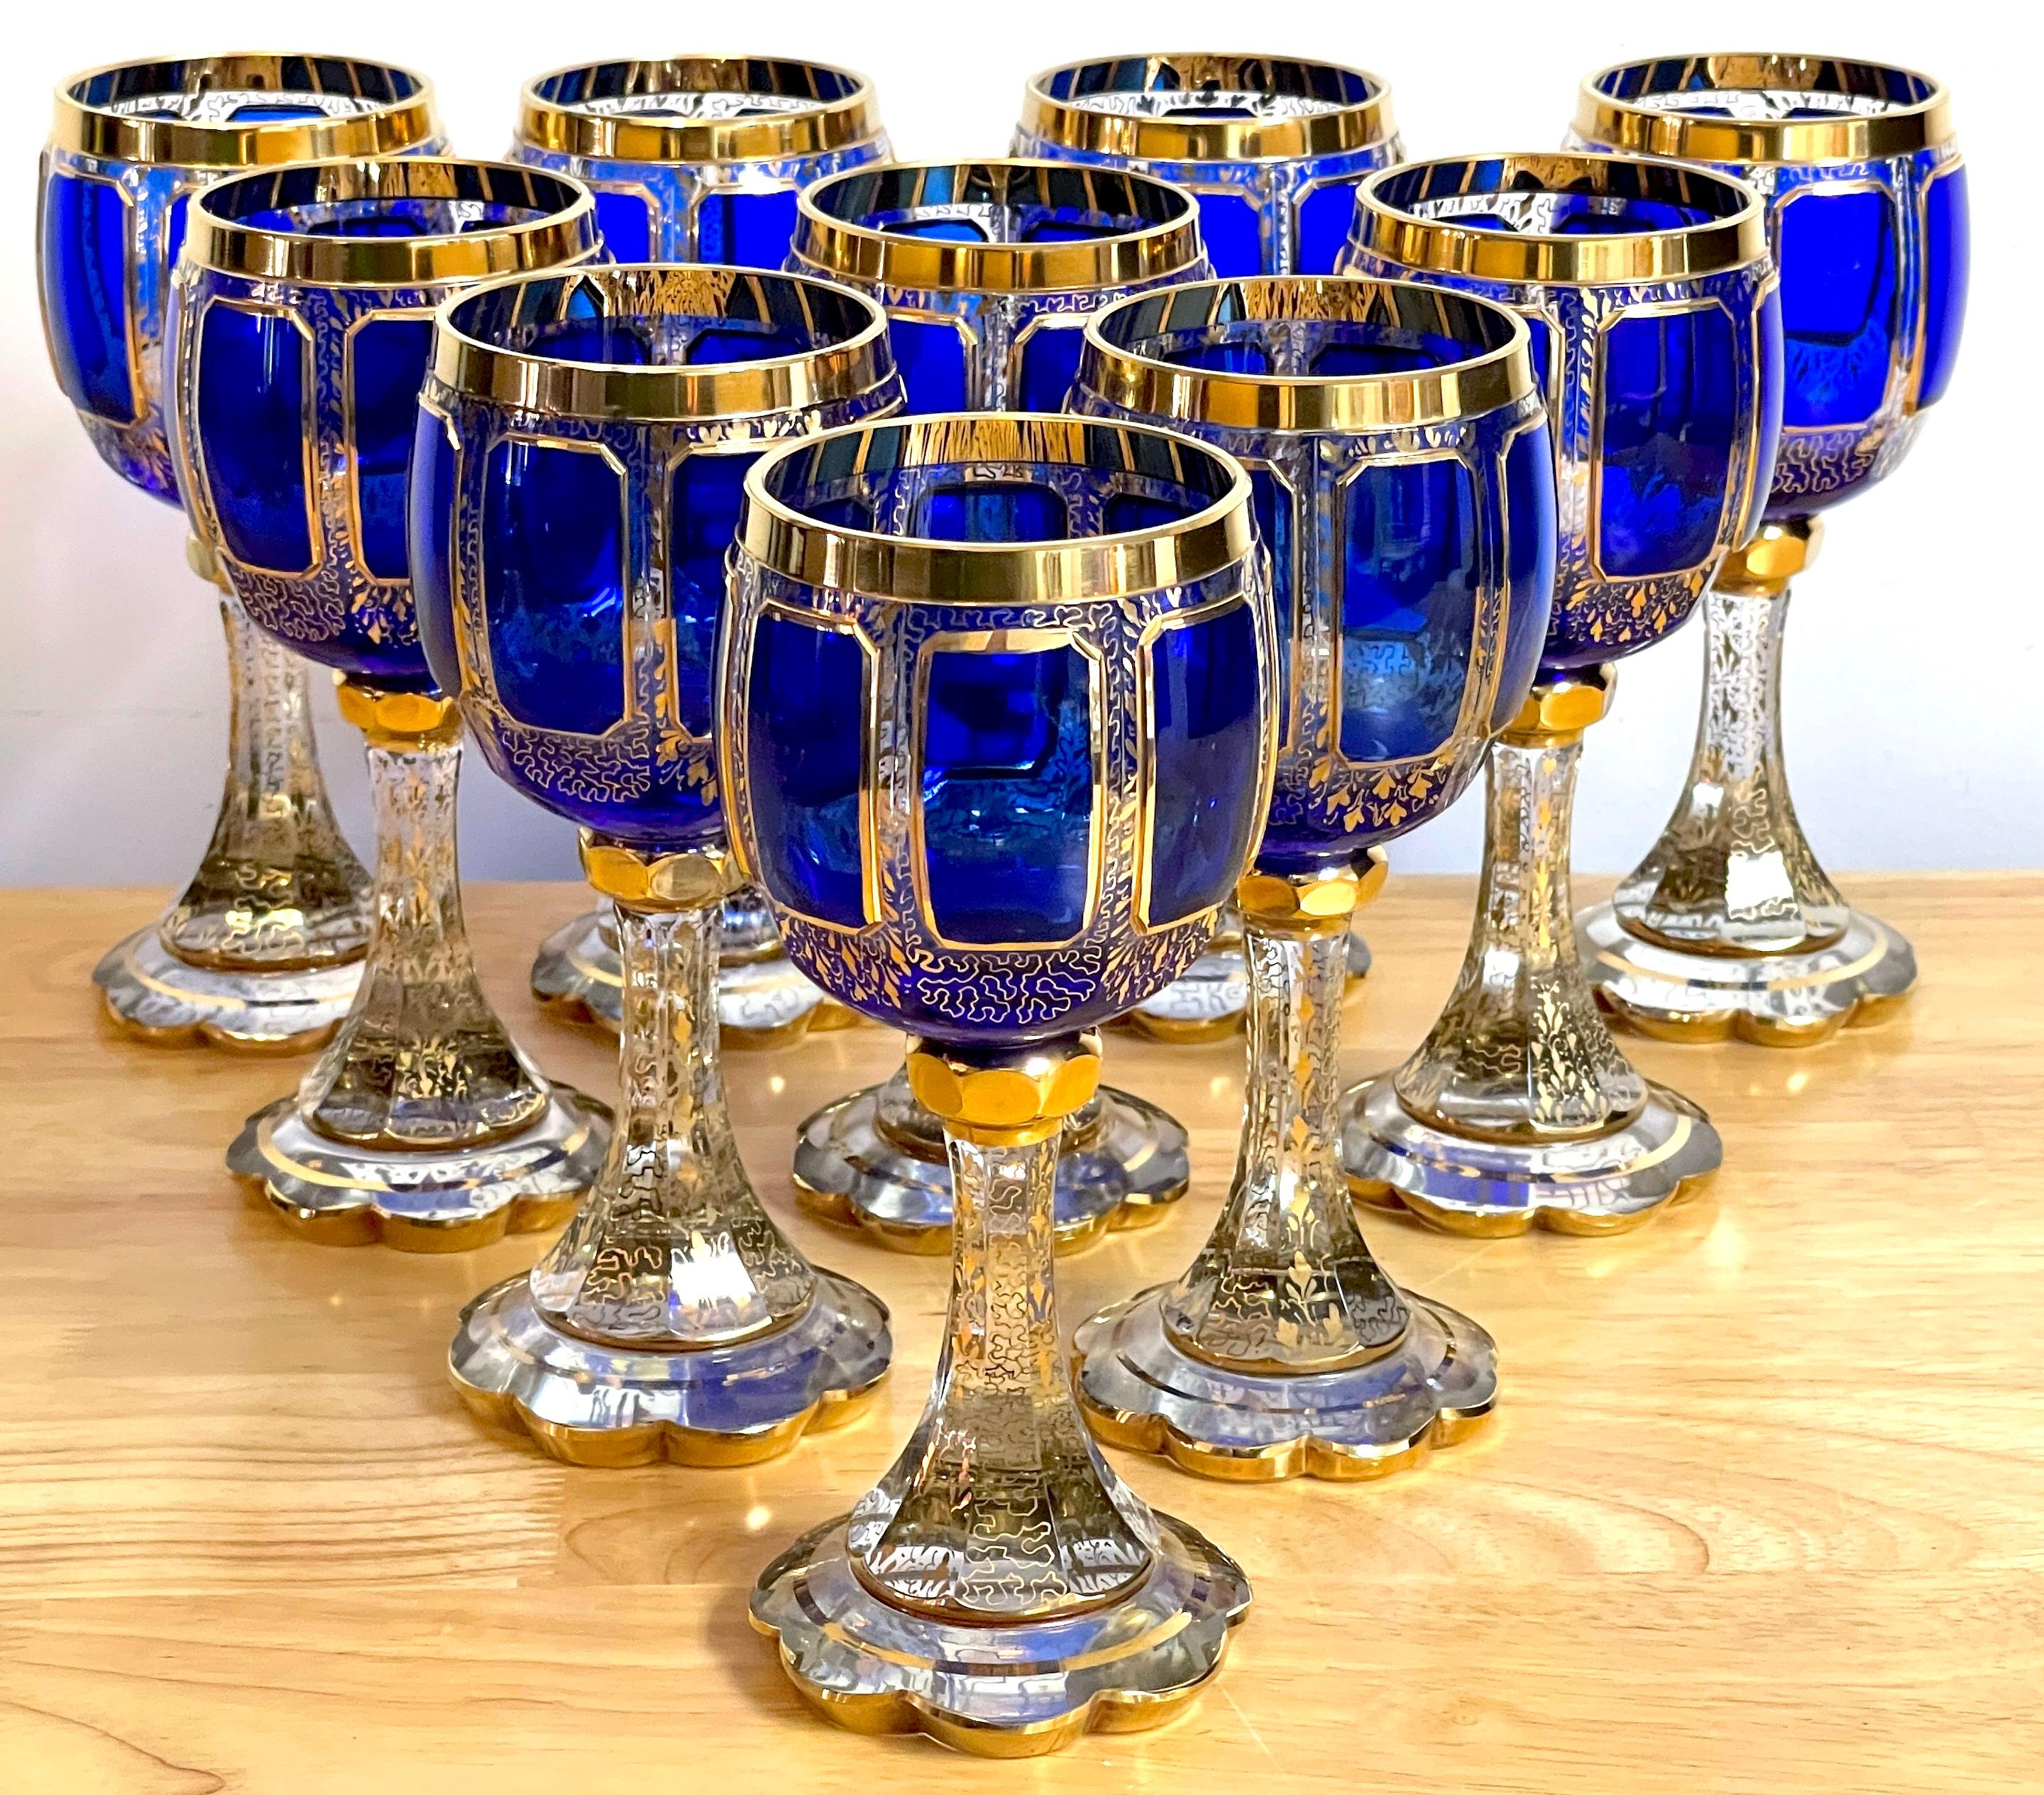 Ten Moser Gilt Enameled Cobalt Paneled Goblets, Each one a chunky goblet with raised eight cobalt panels, with all over intricate gilt enamel. The condition is excellent, no flaws observed, the decoration is bright and intact. There are some